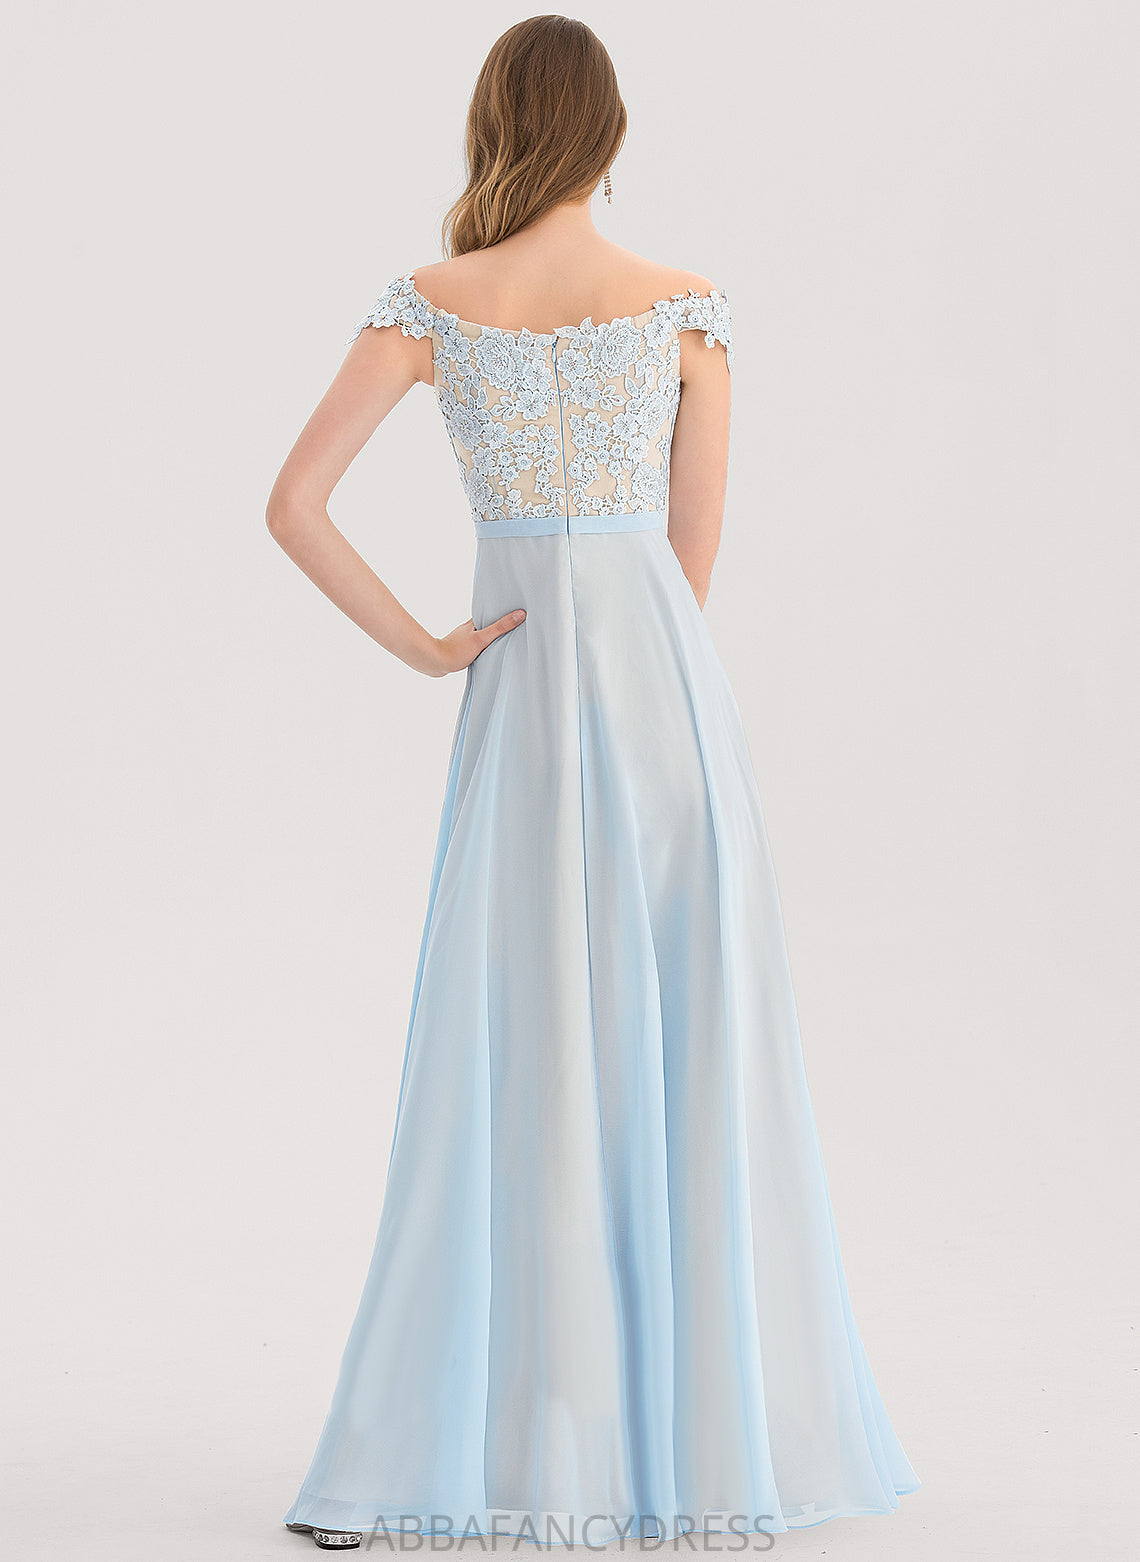 Lace Off-the-Shoulder Mckayla Beading Sequins A-Line Prom Dresses Floor-Length With Chiffon